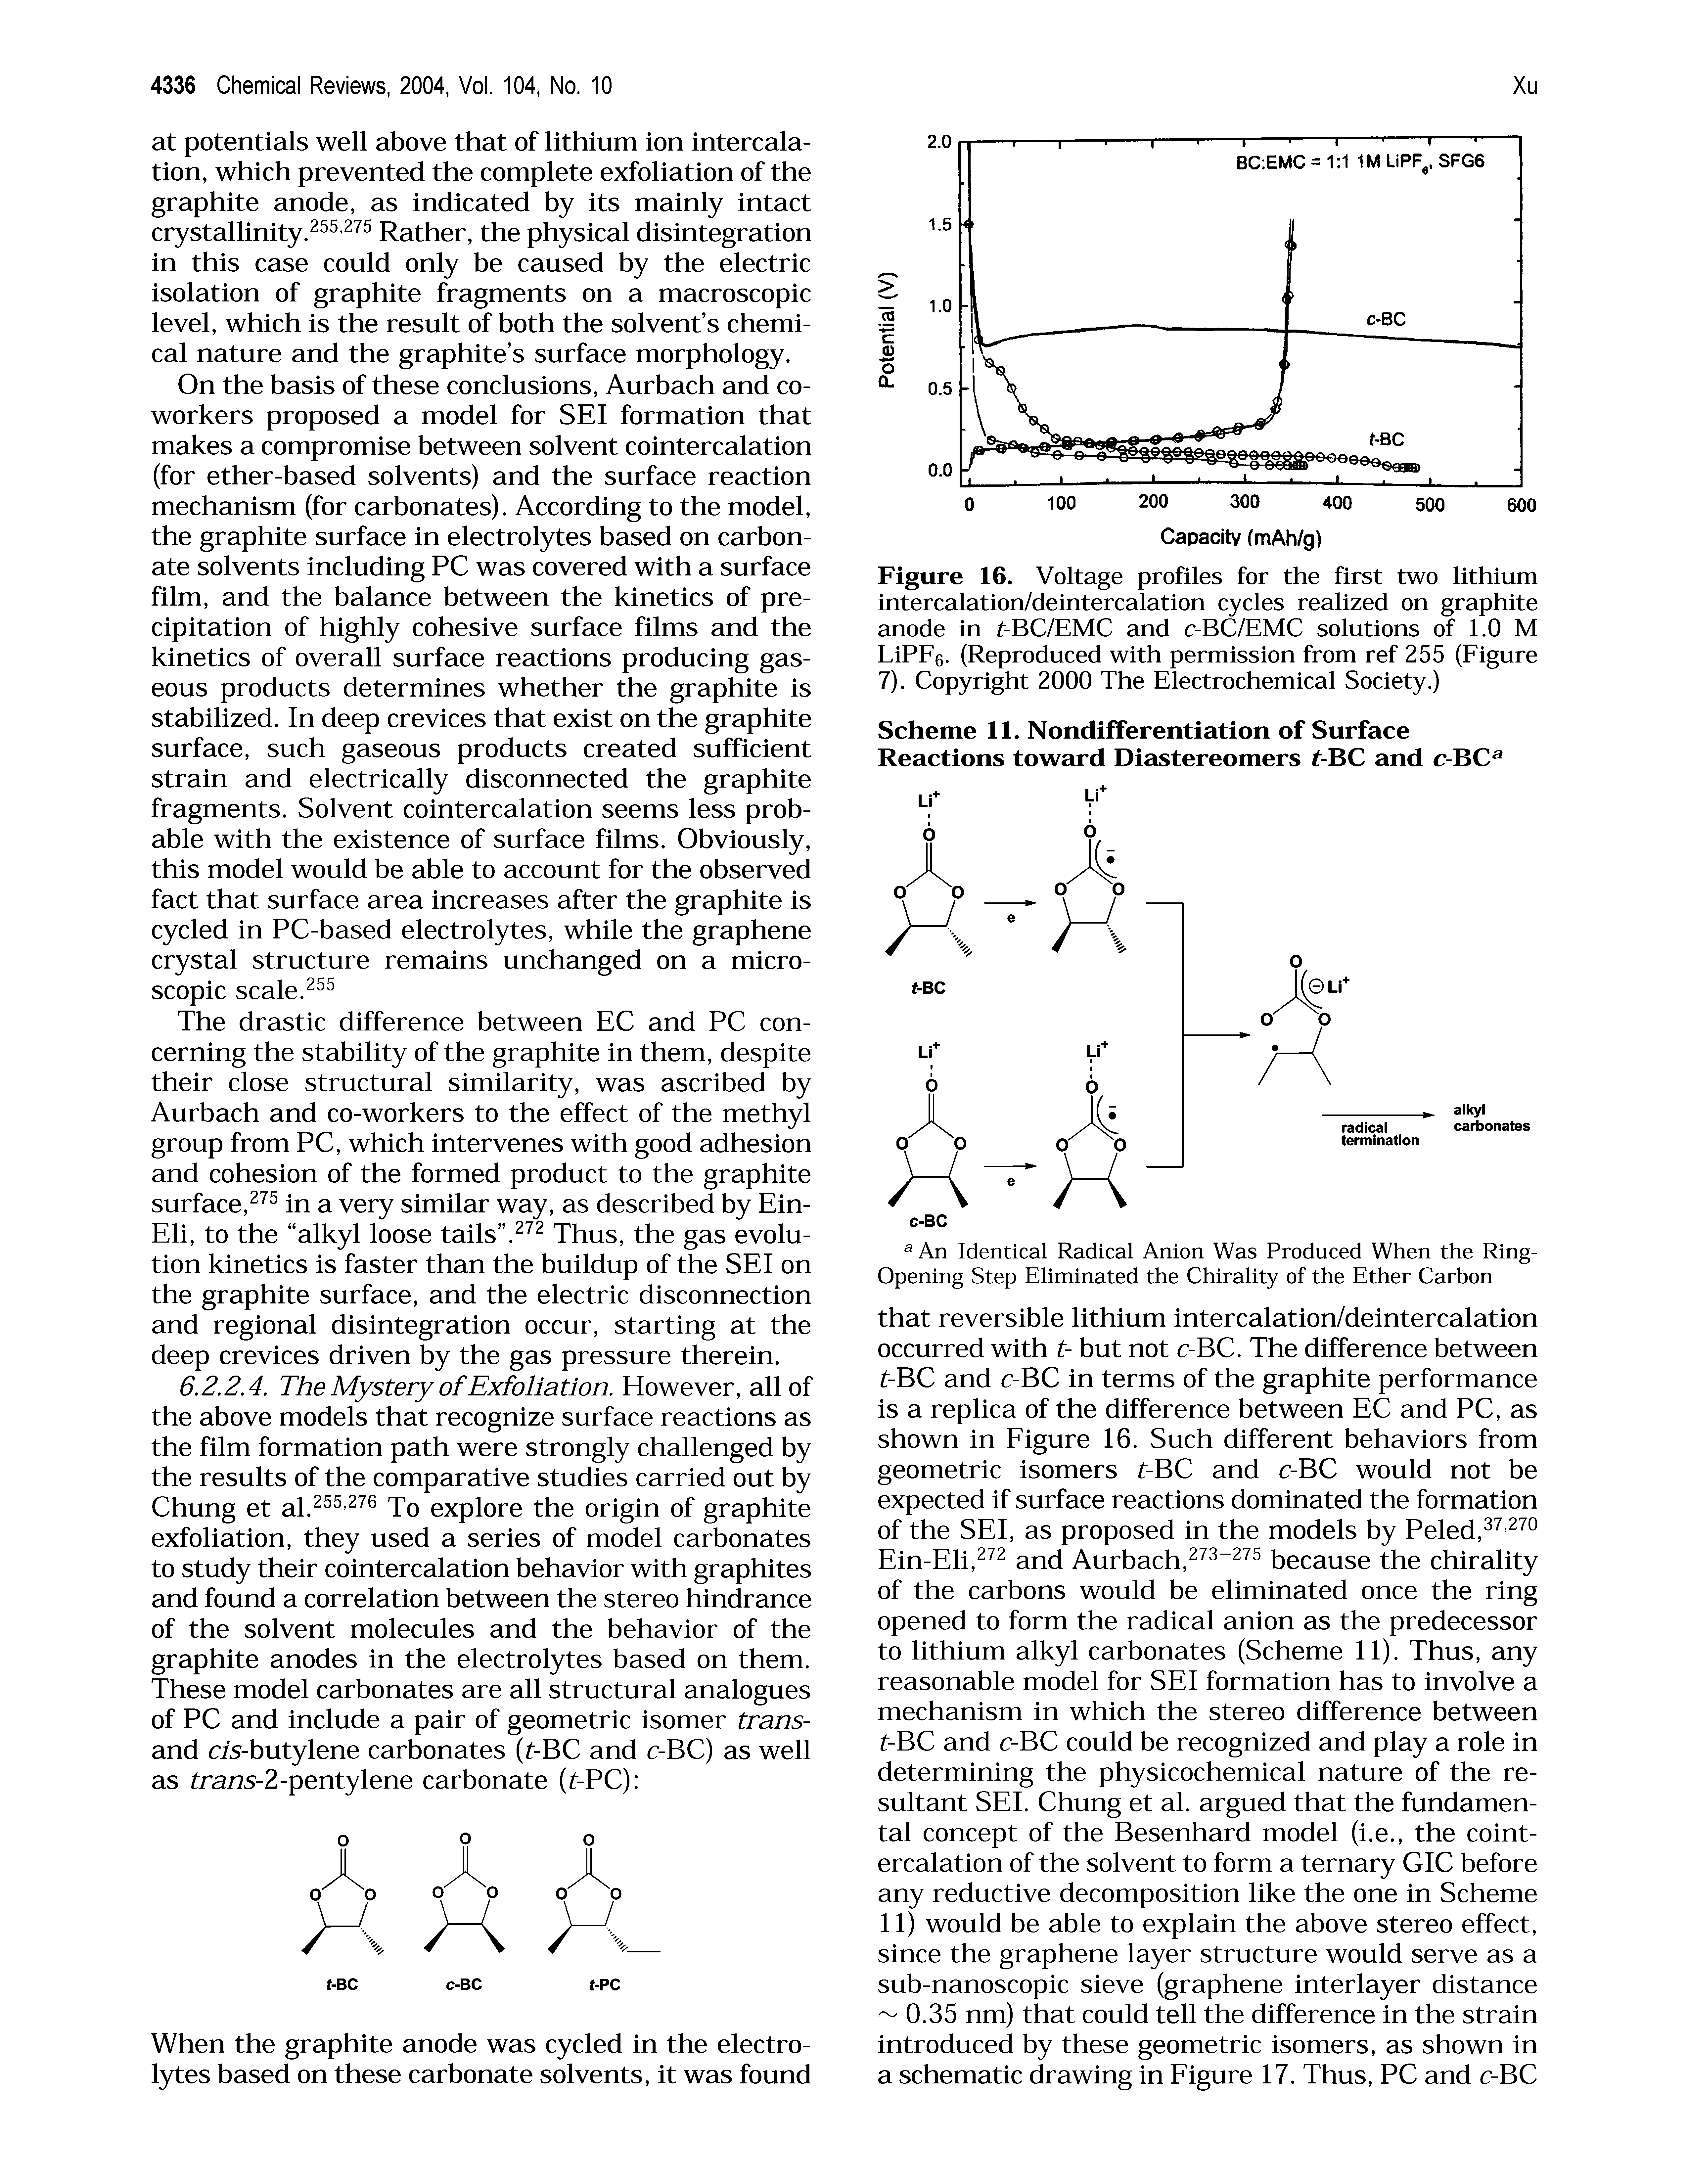 Figure 16. Voltage profiles for the first two lithium intercalation/deintercalation cycles realized on graphite anode in t-BC/EMC and c-BC/EMC solutions of 1.0 M LiPEe. (Reproduced with permission from ref 255 (Eigure 7). Copyright 2000 The Electrochemical Society.)...